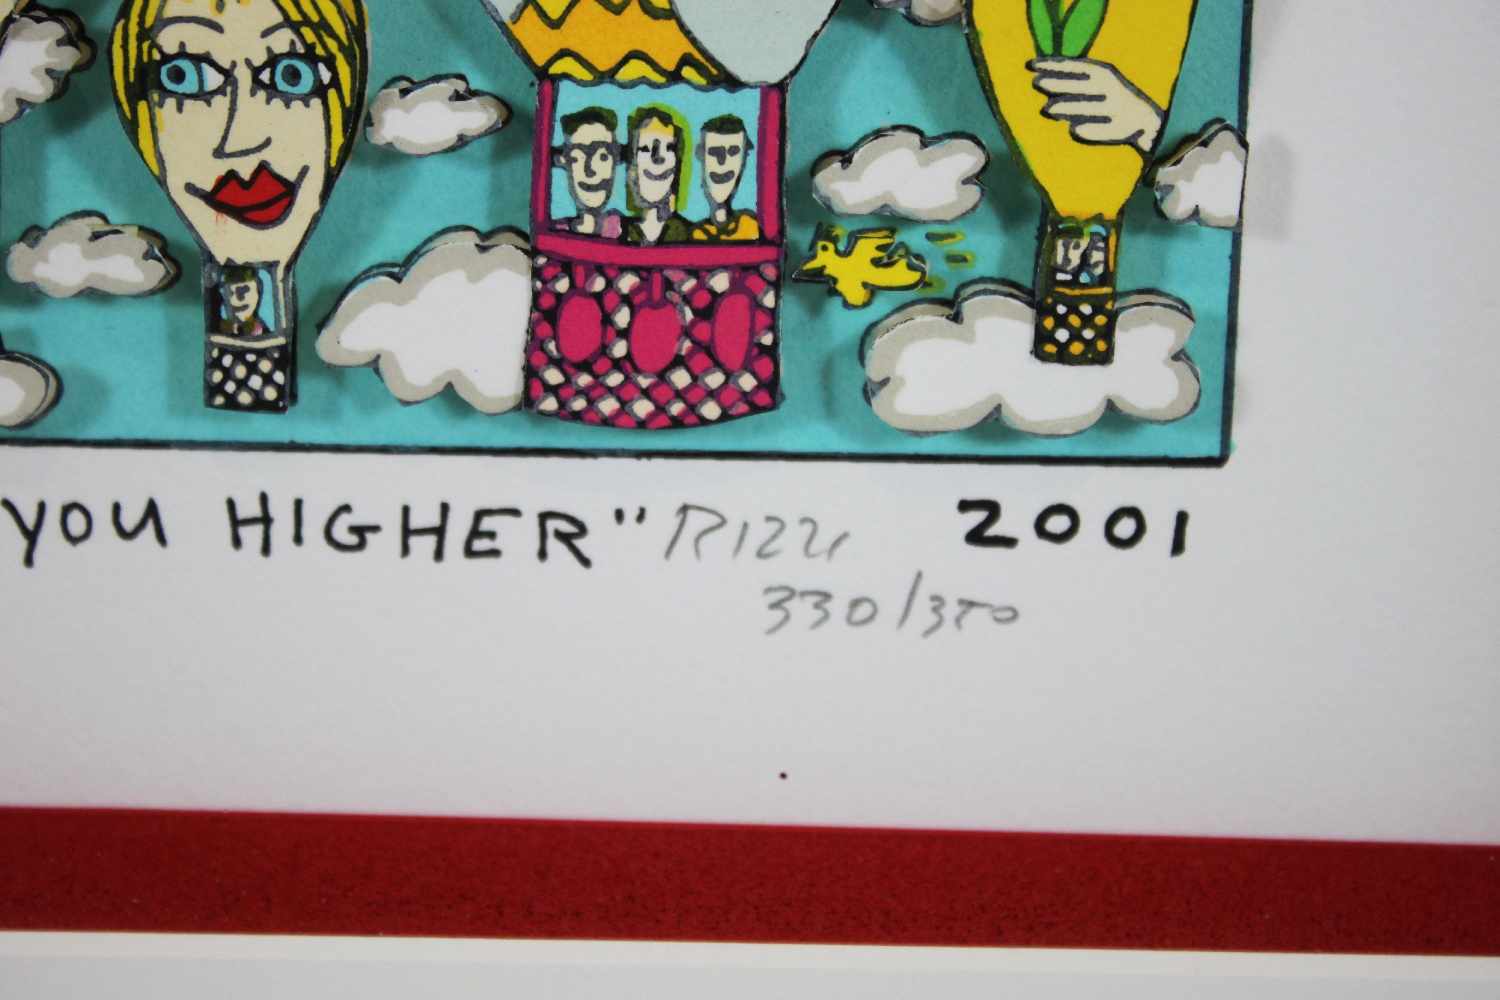 James Rizzi (1950 - 2011), I want to take you higher, 2001, 3-D Lithografie in Farbe, im Stein - Image 3 of 3